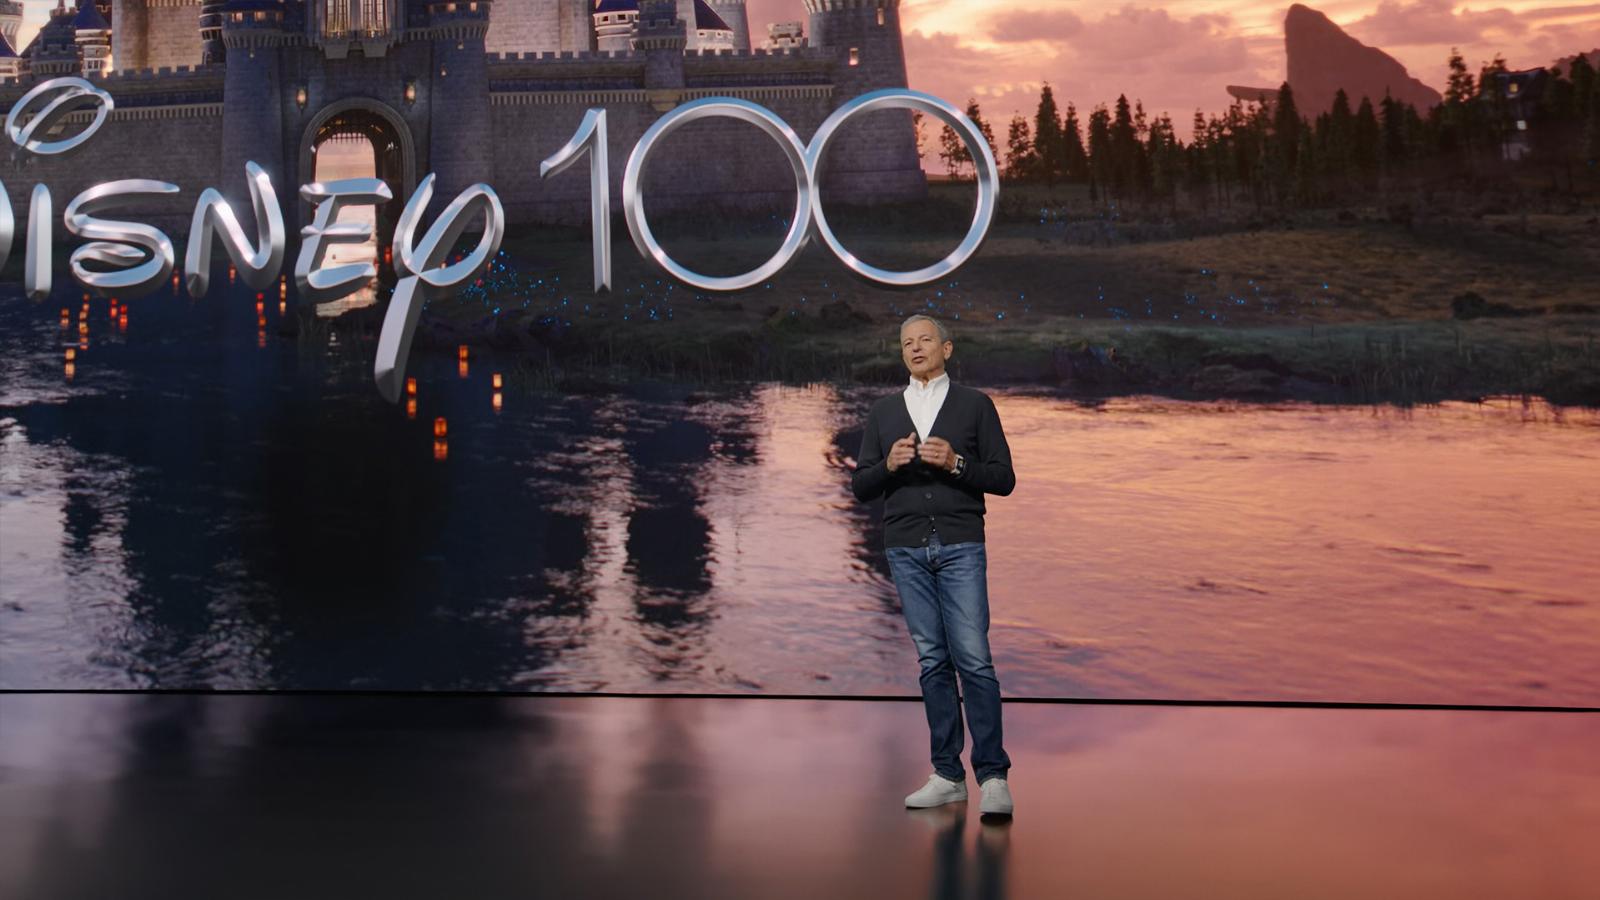 Disney+ will be available on the Apple Vision Pro at launch